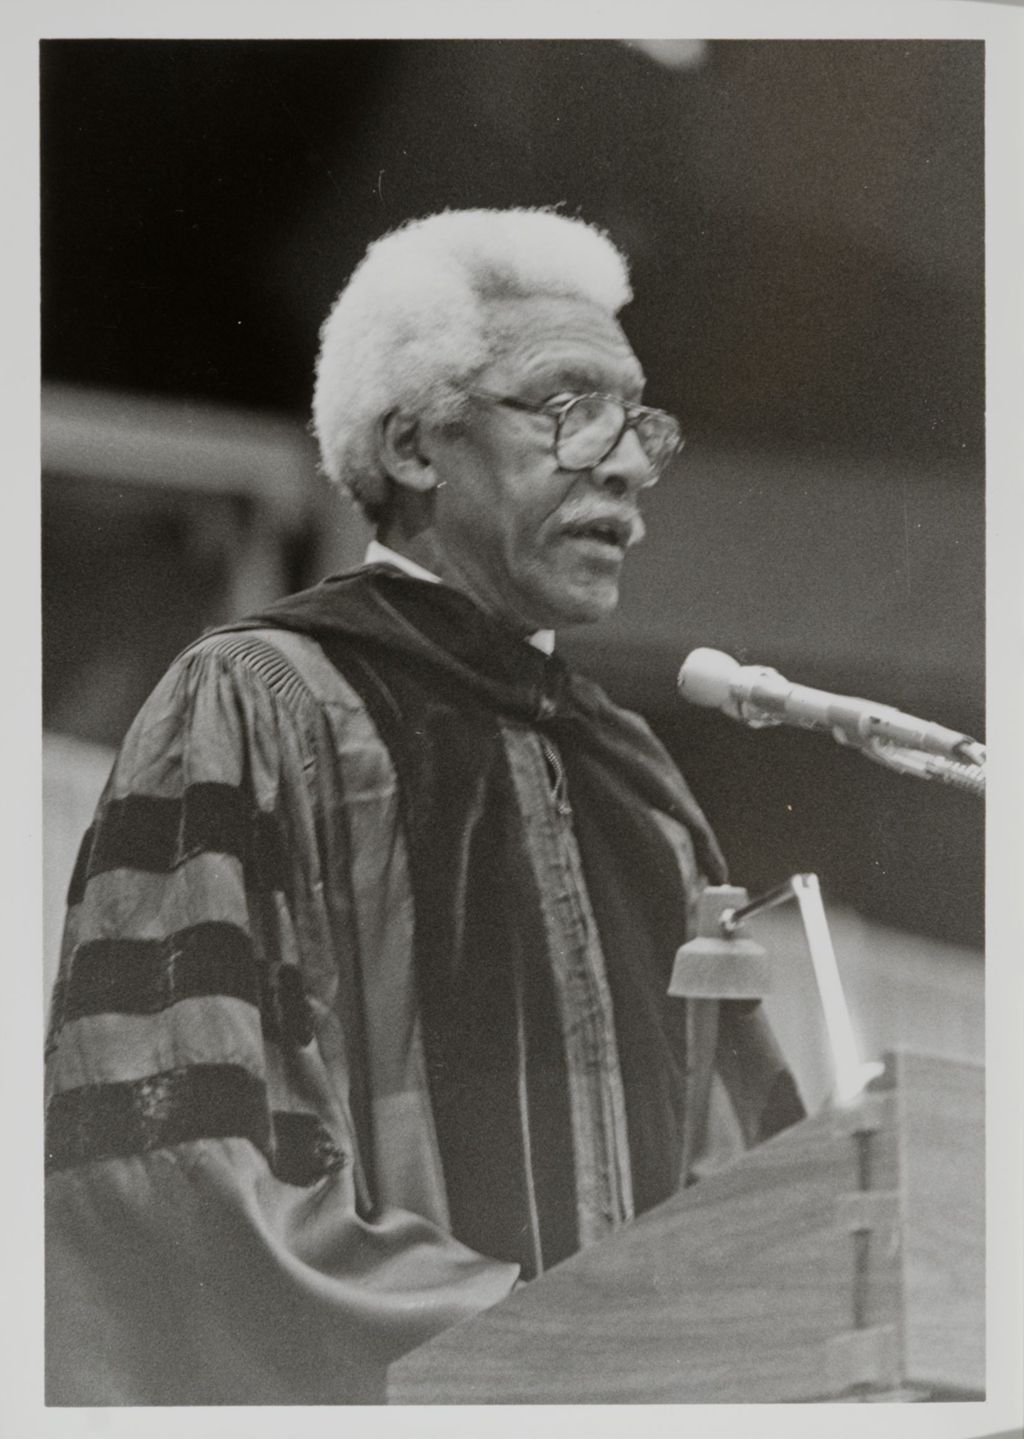 Miniature of Bayard Rustin addressing the audience at the graduation ceremony